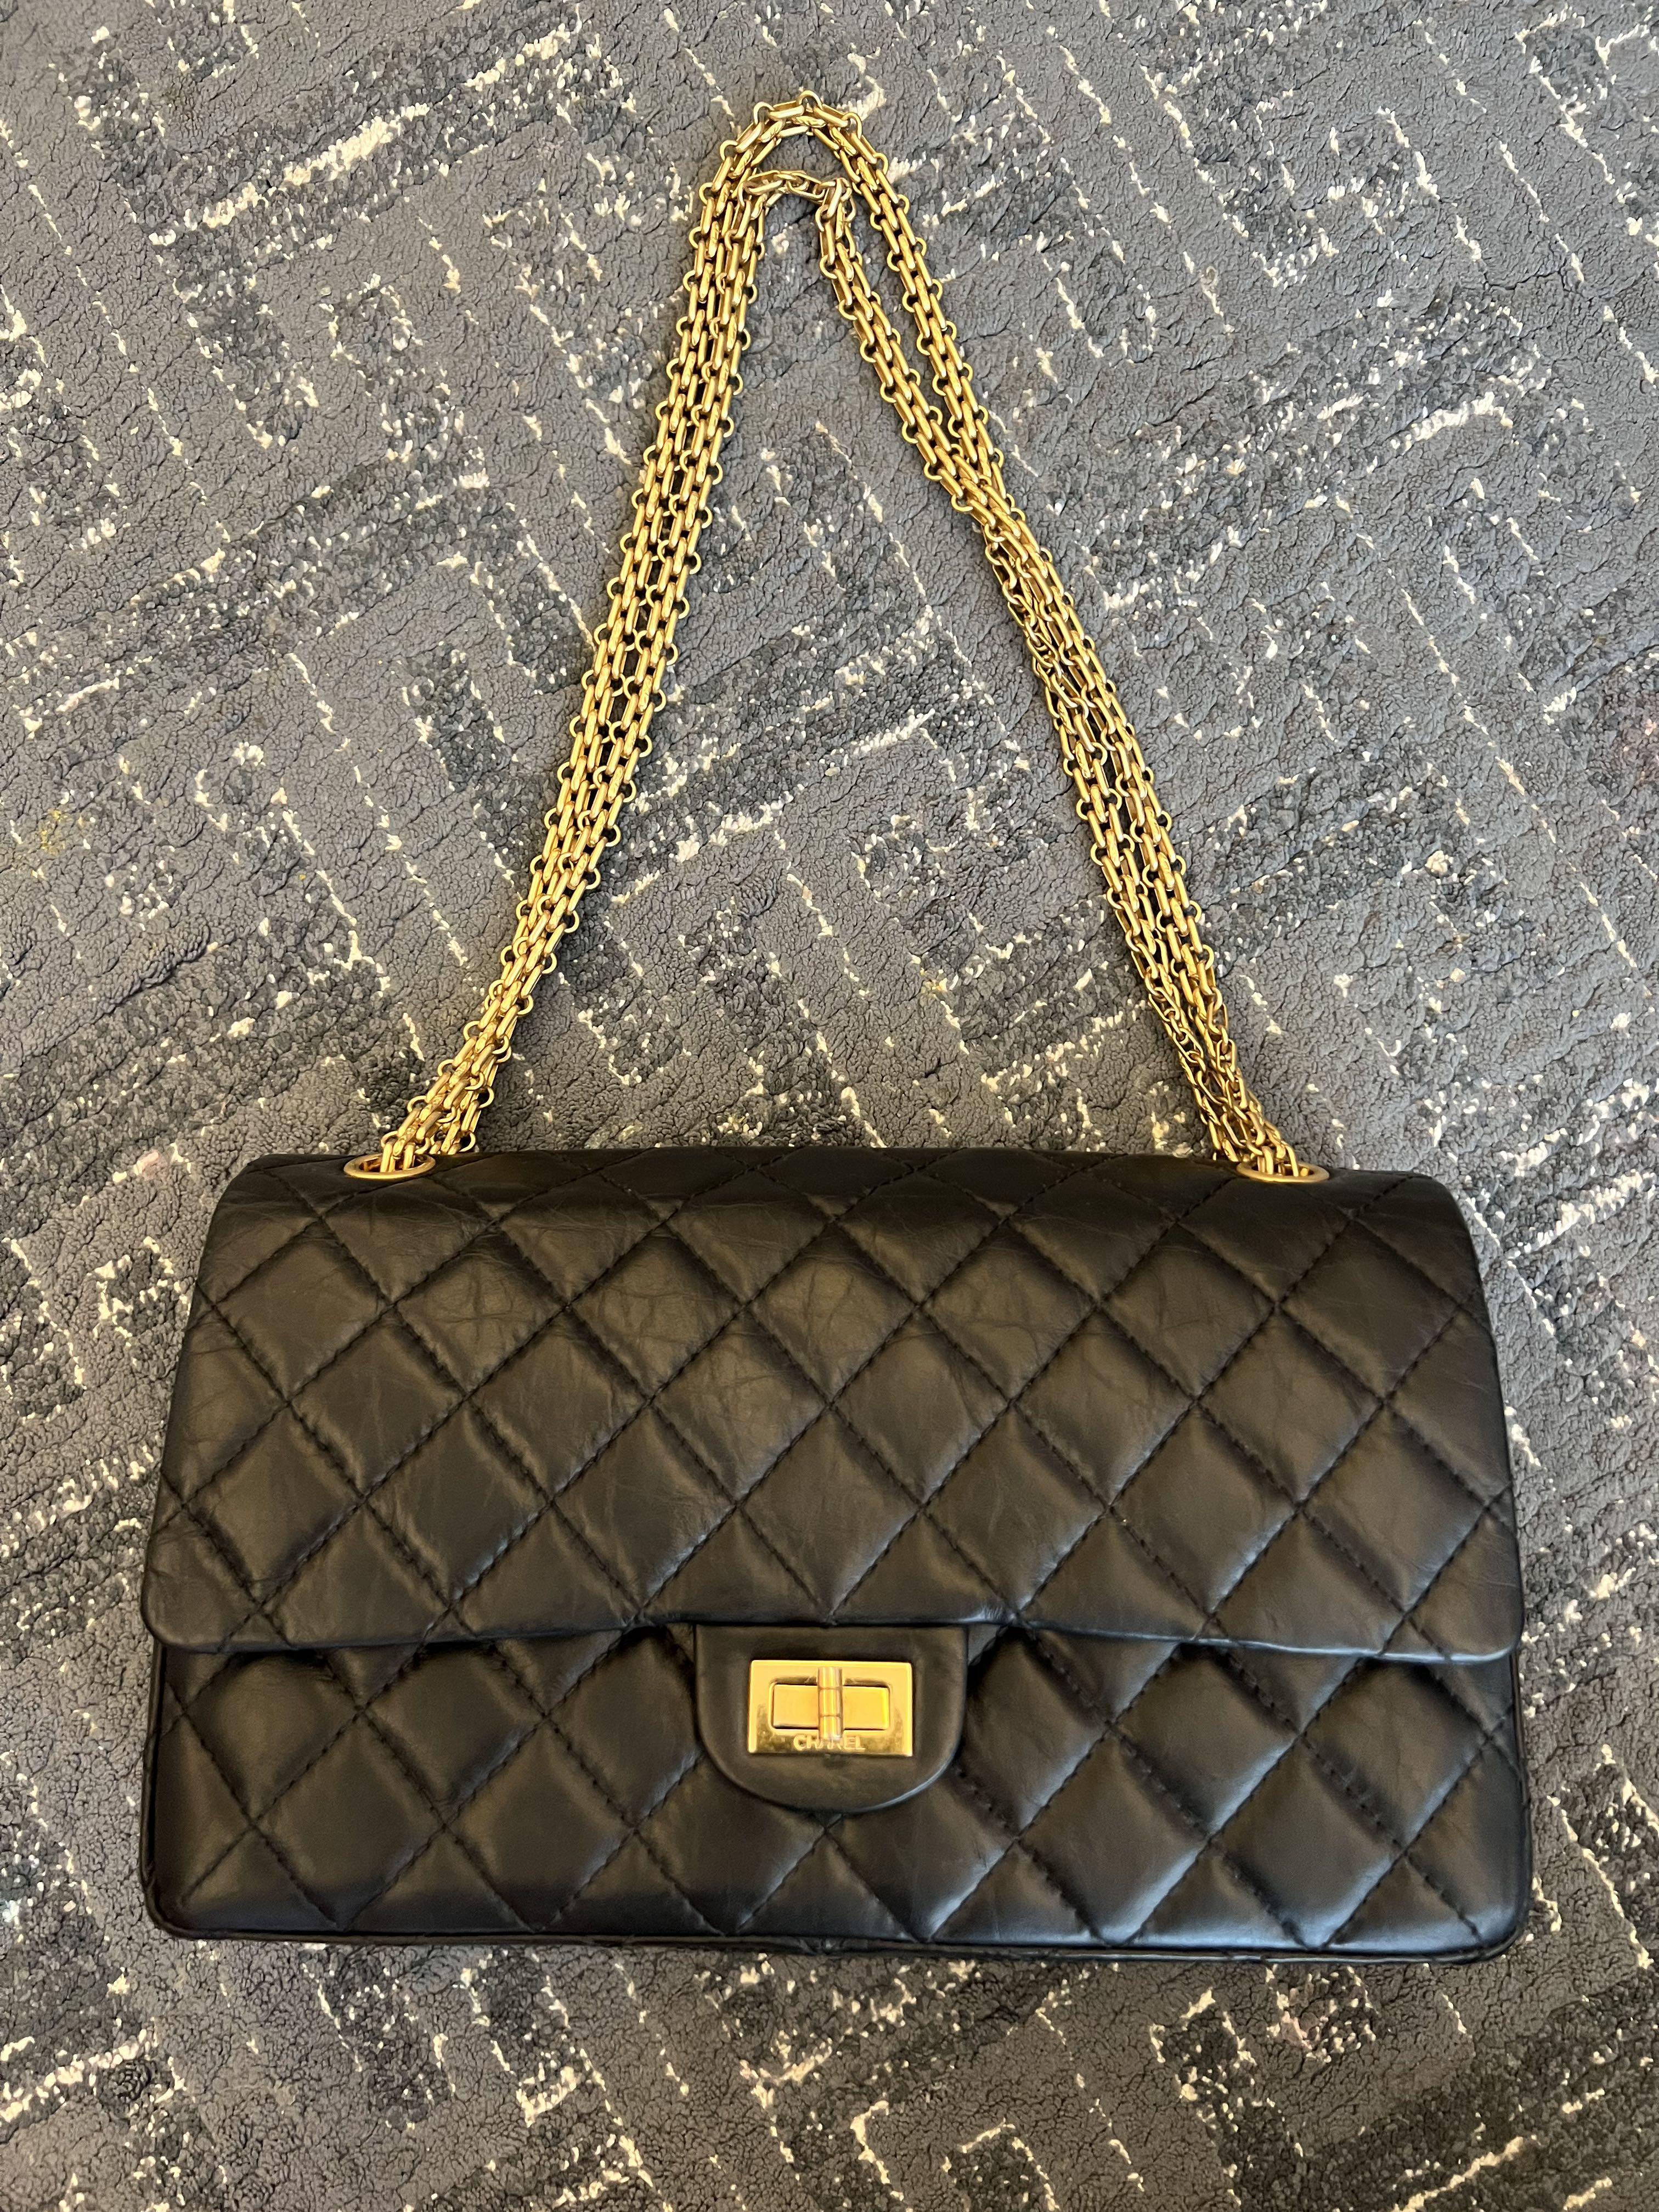 Chanel Reissue 226 Review 